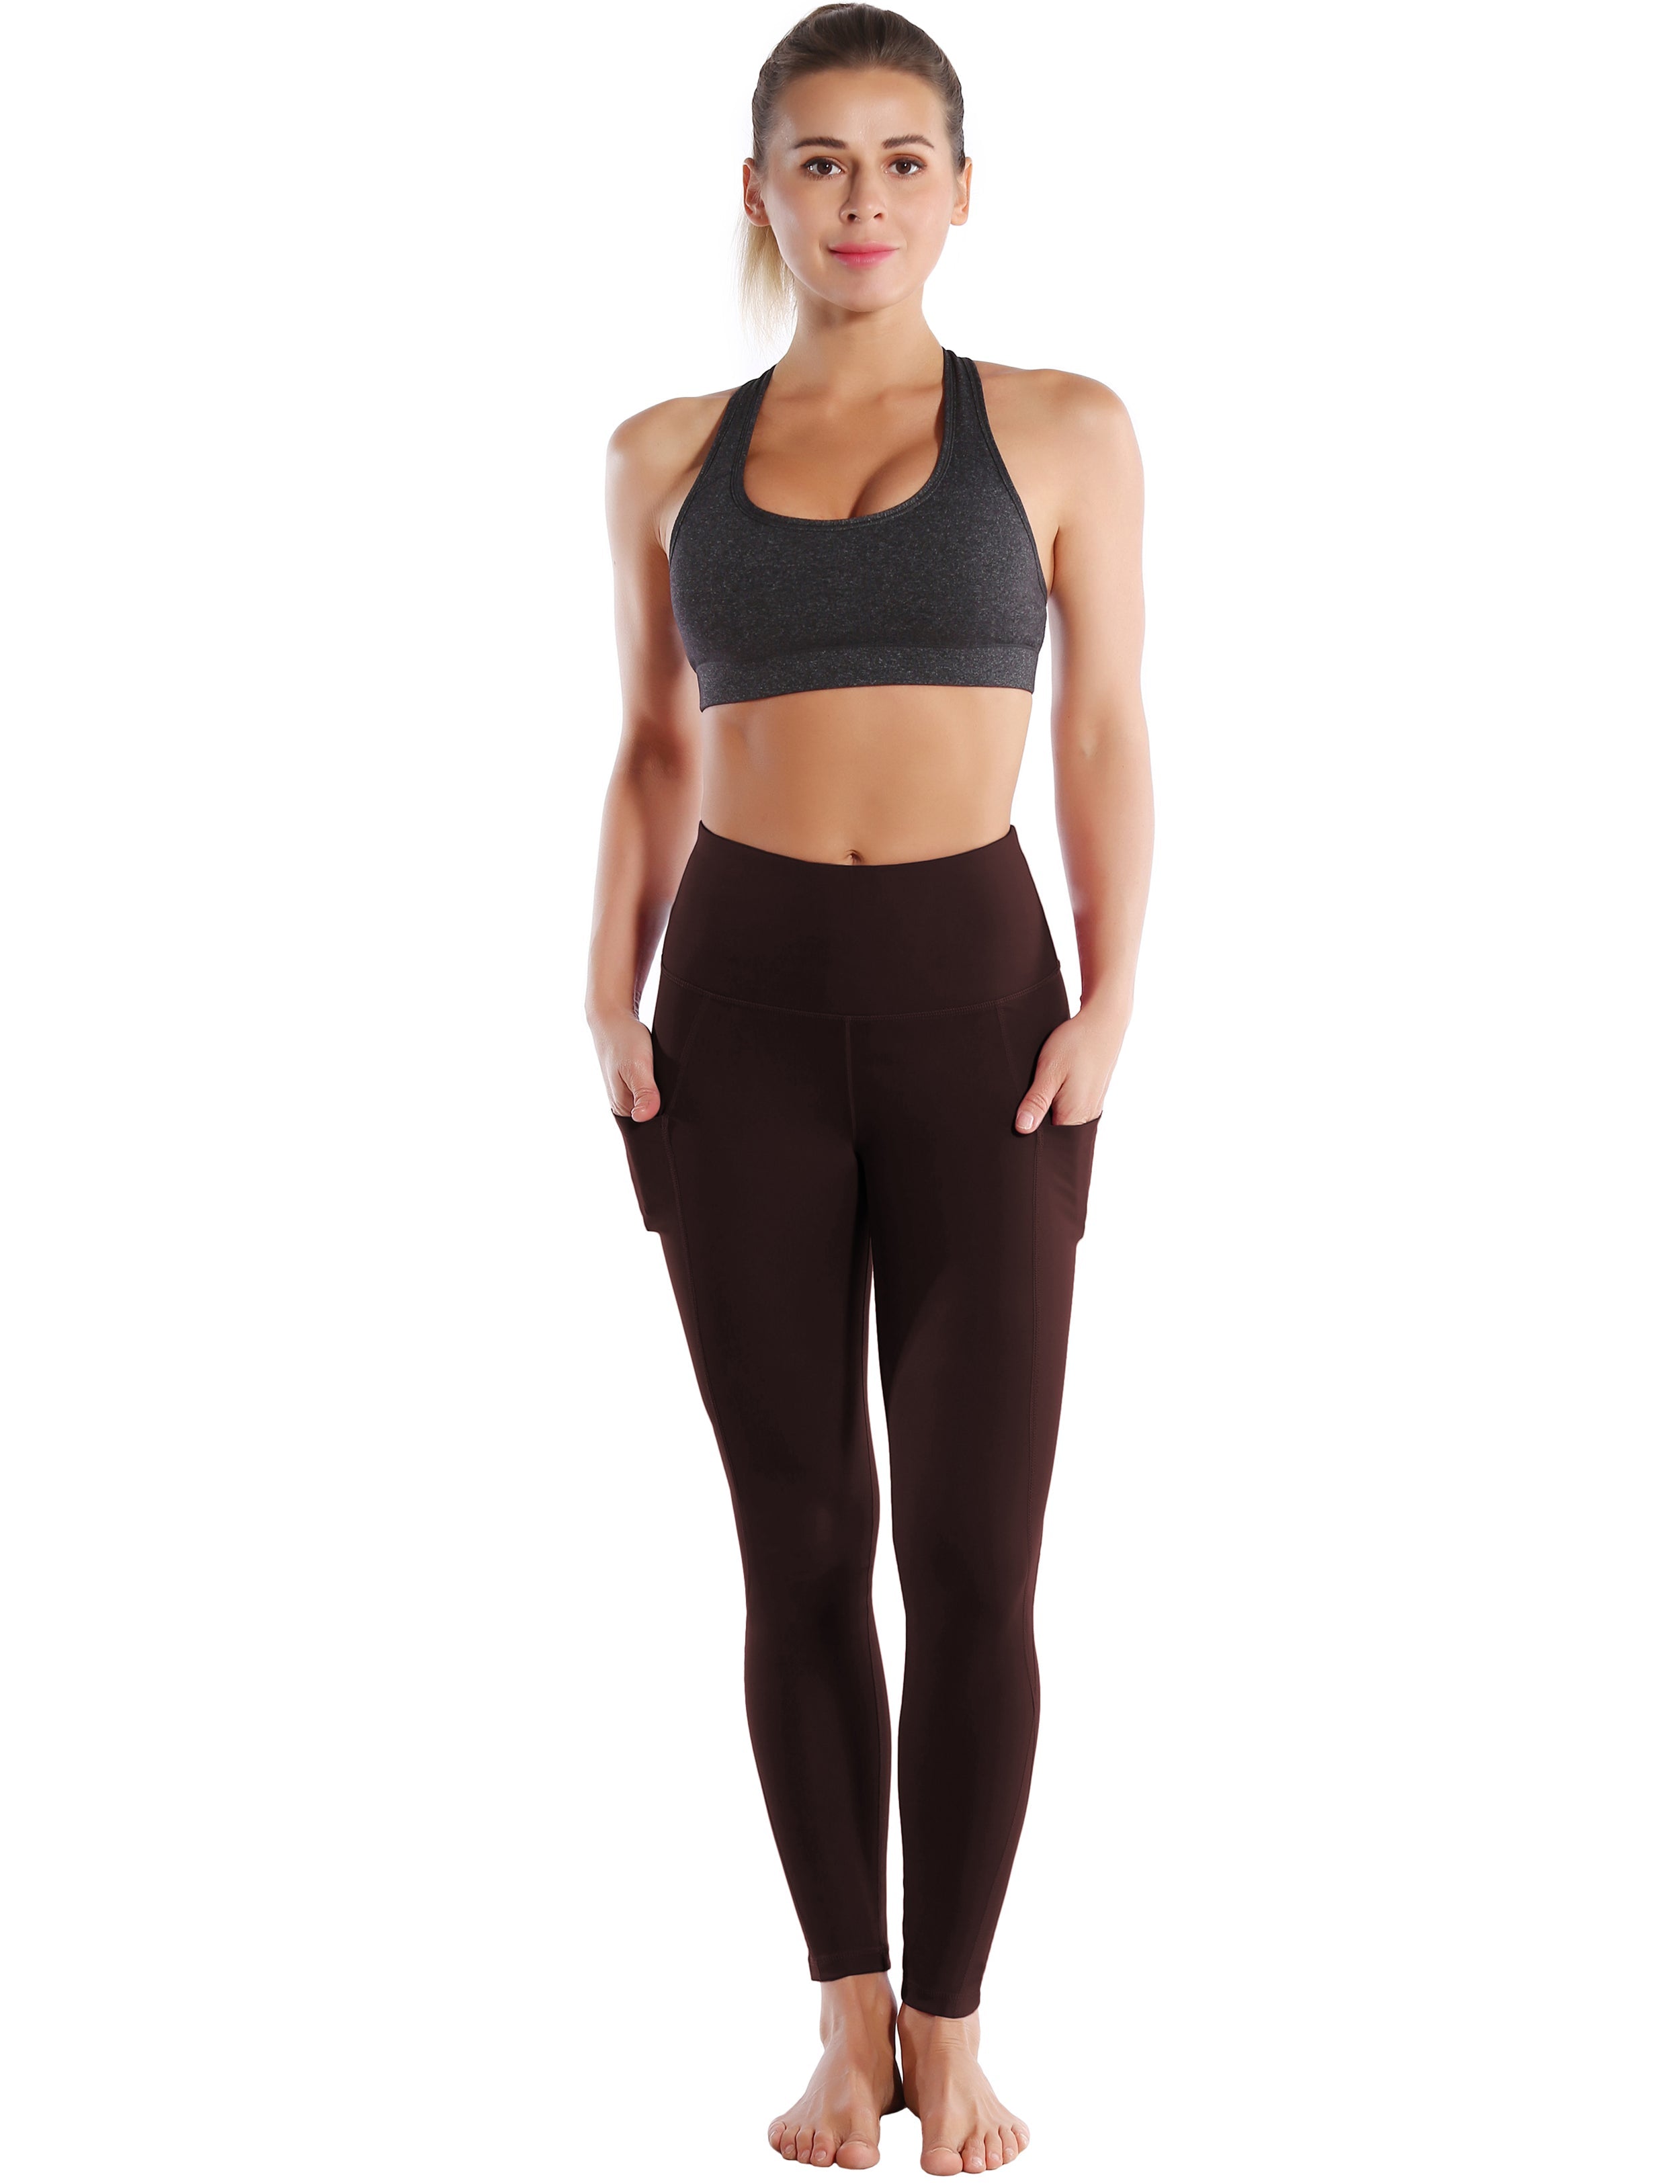 High Waist Side Pockets Jogging Pants mahoganymaroon 75% Nylon, 25% Spandex Fabric doesn't attract lint easily 4-way stretch No see-through Moisture-wicking Tummy control Inner pocket